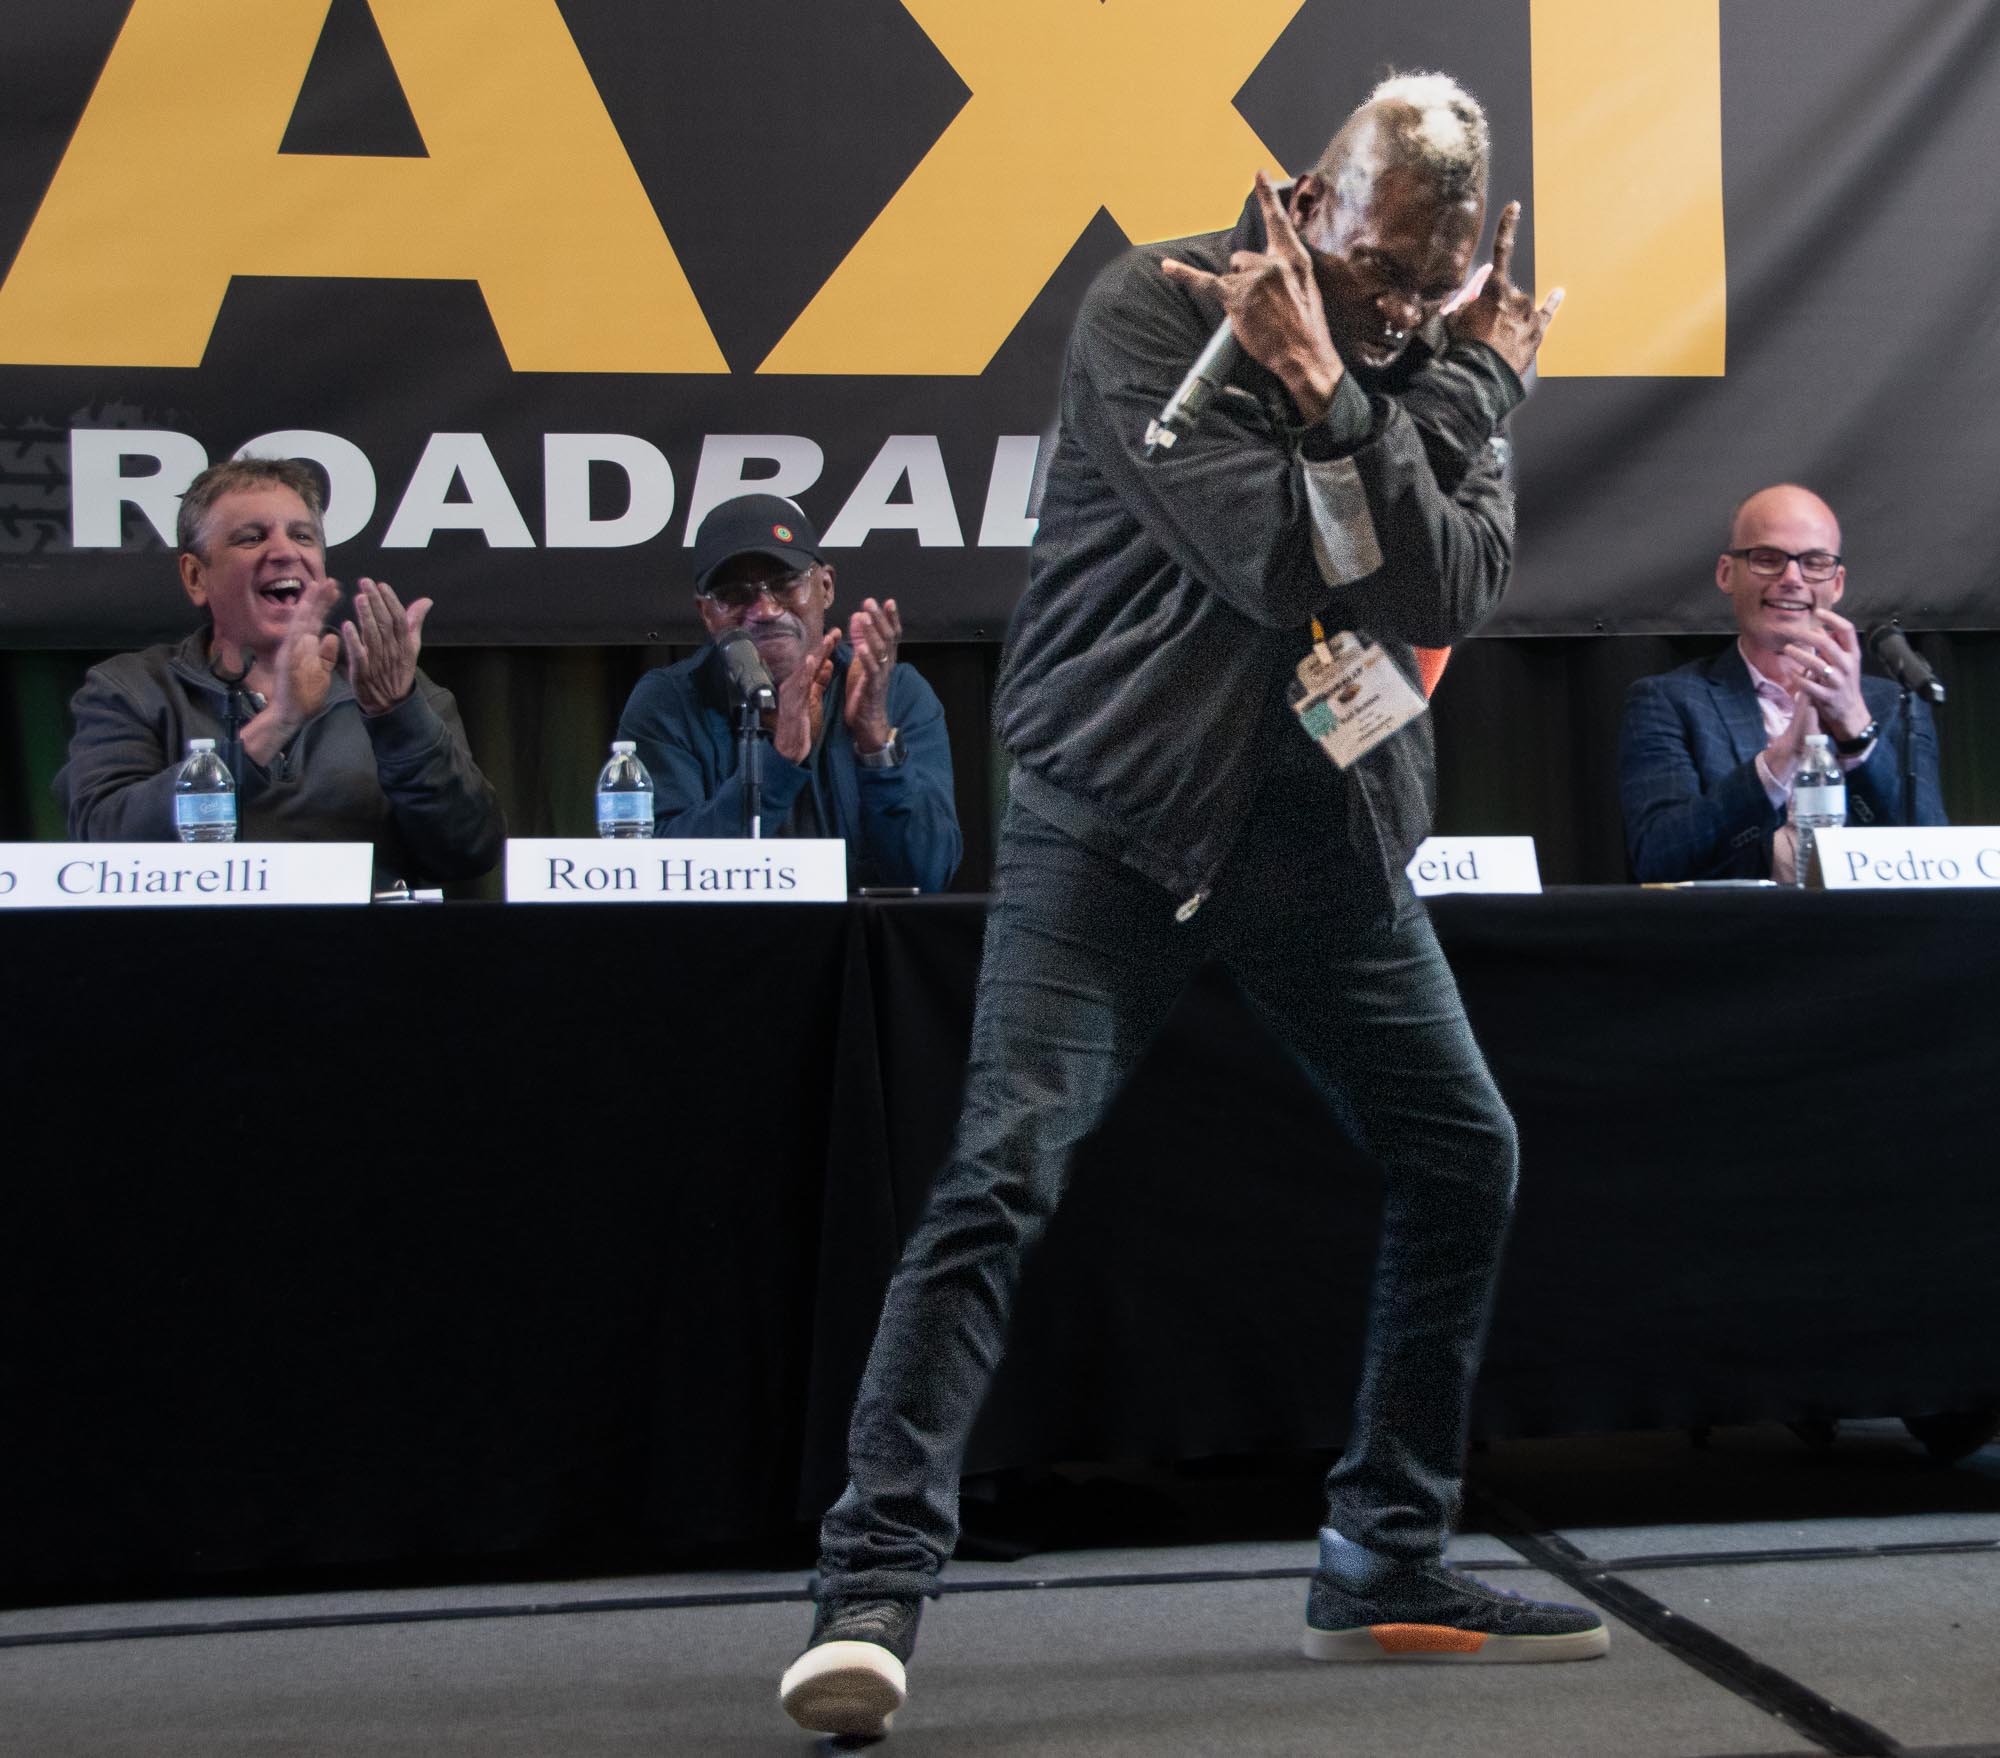 TAXI member, K.P. Bolden jumped on stage to rock out to Wild Man Chris’s song during the Happy Ending Pitch panel at the end of the Rally. That panel is pretty famous for being lots of fun and somewhat silly, but K.P. made it even better this year!